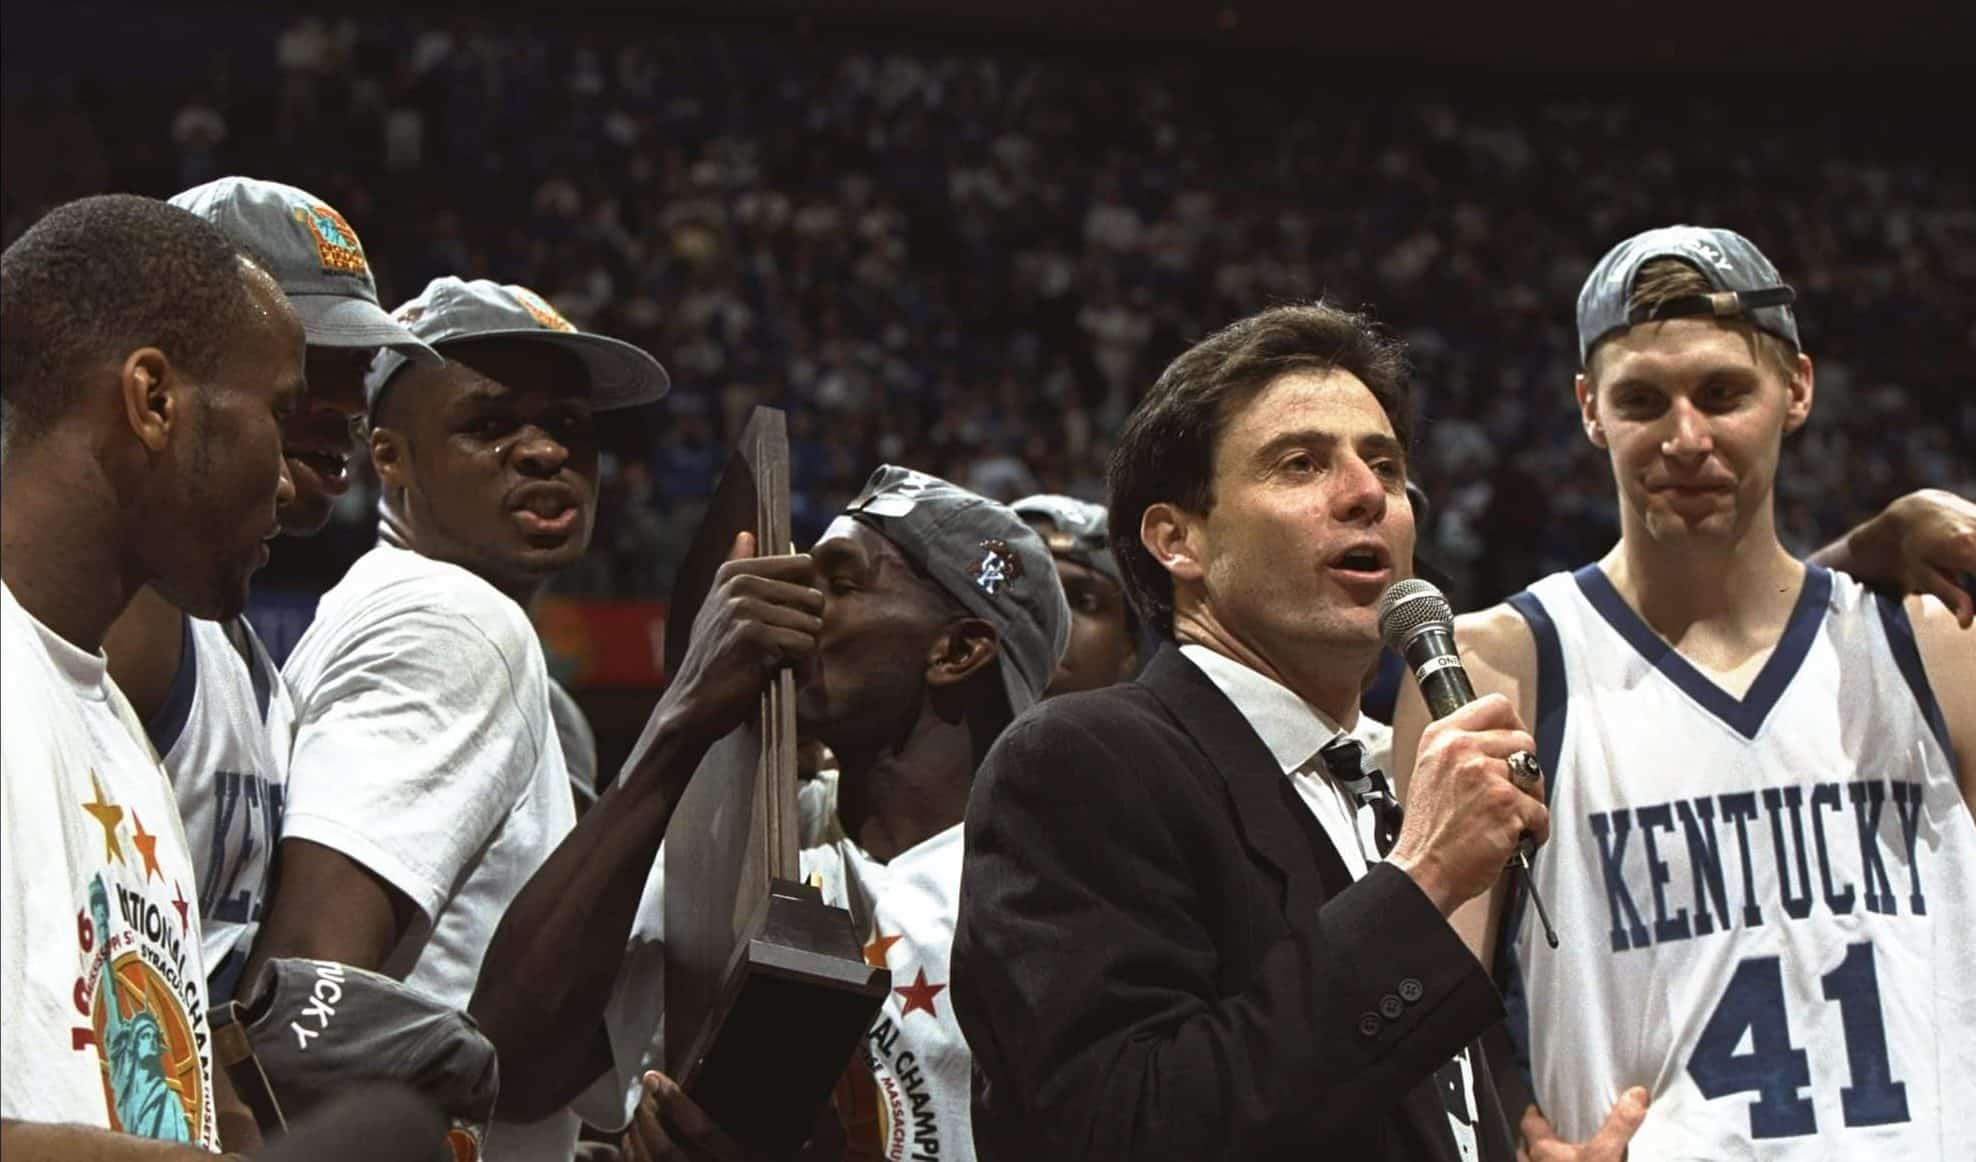 Kentucky Wildcats head coach Rick Pitino talks with his team after a game against the Syracuse Orangemen at the Meadowlands in East Rutherford, New Jersey. Kentucky won the game, 76-67.